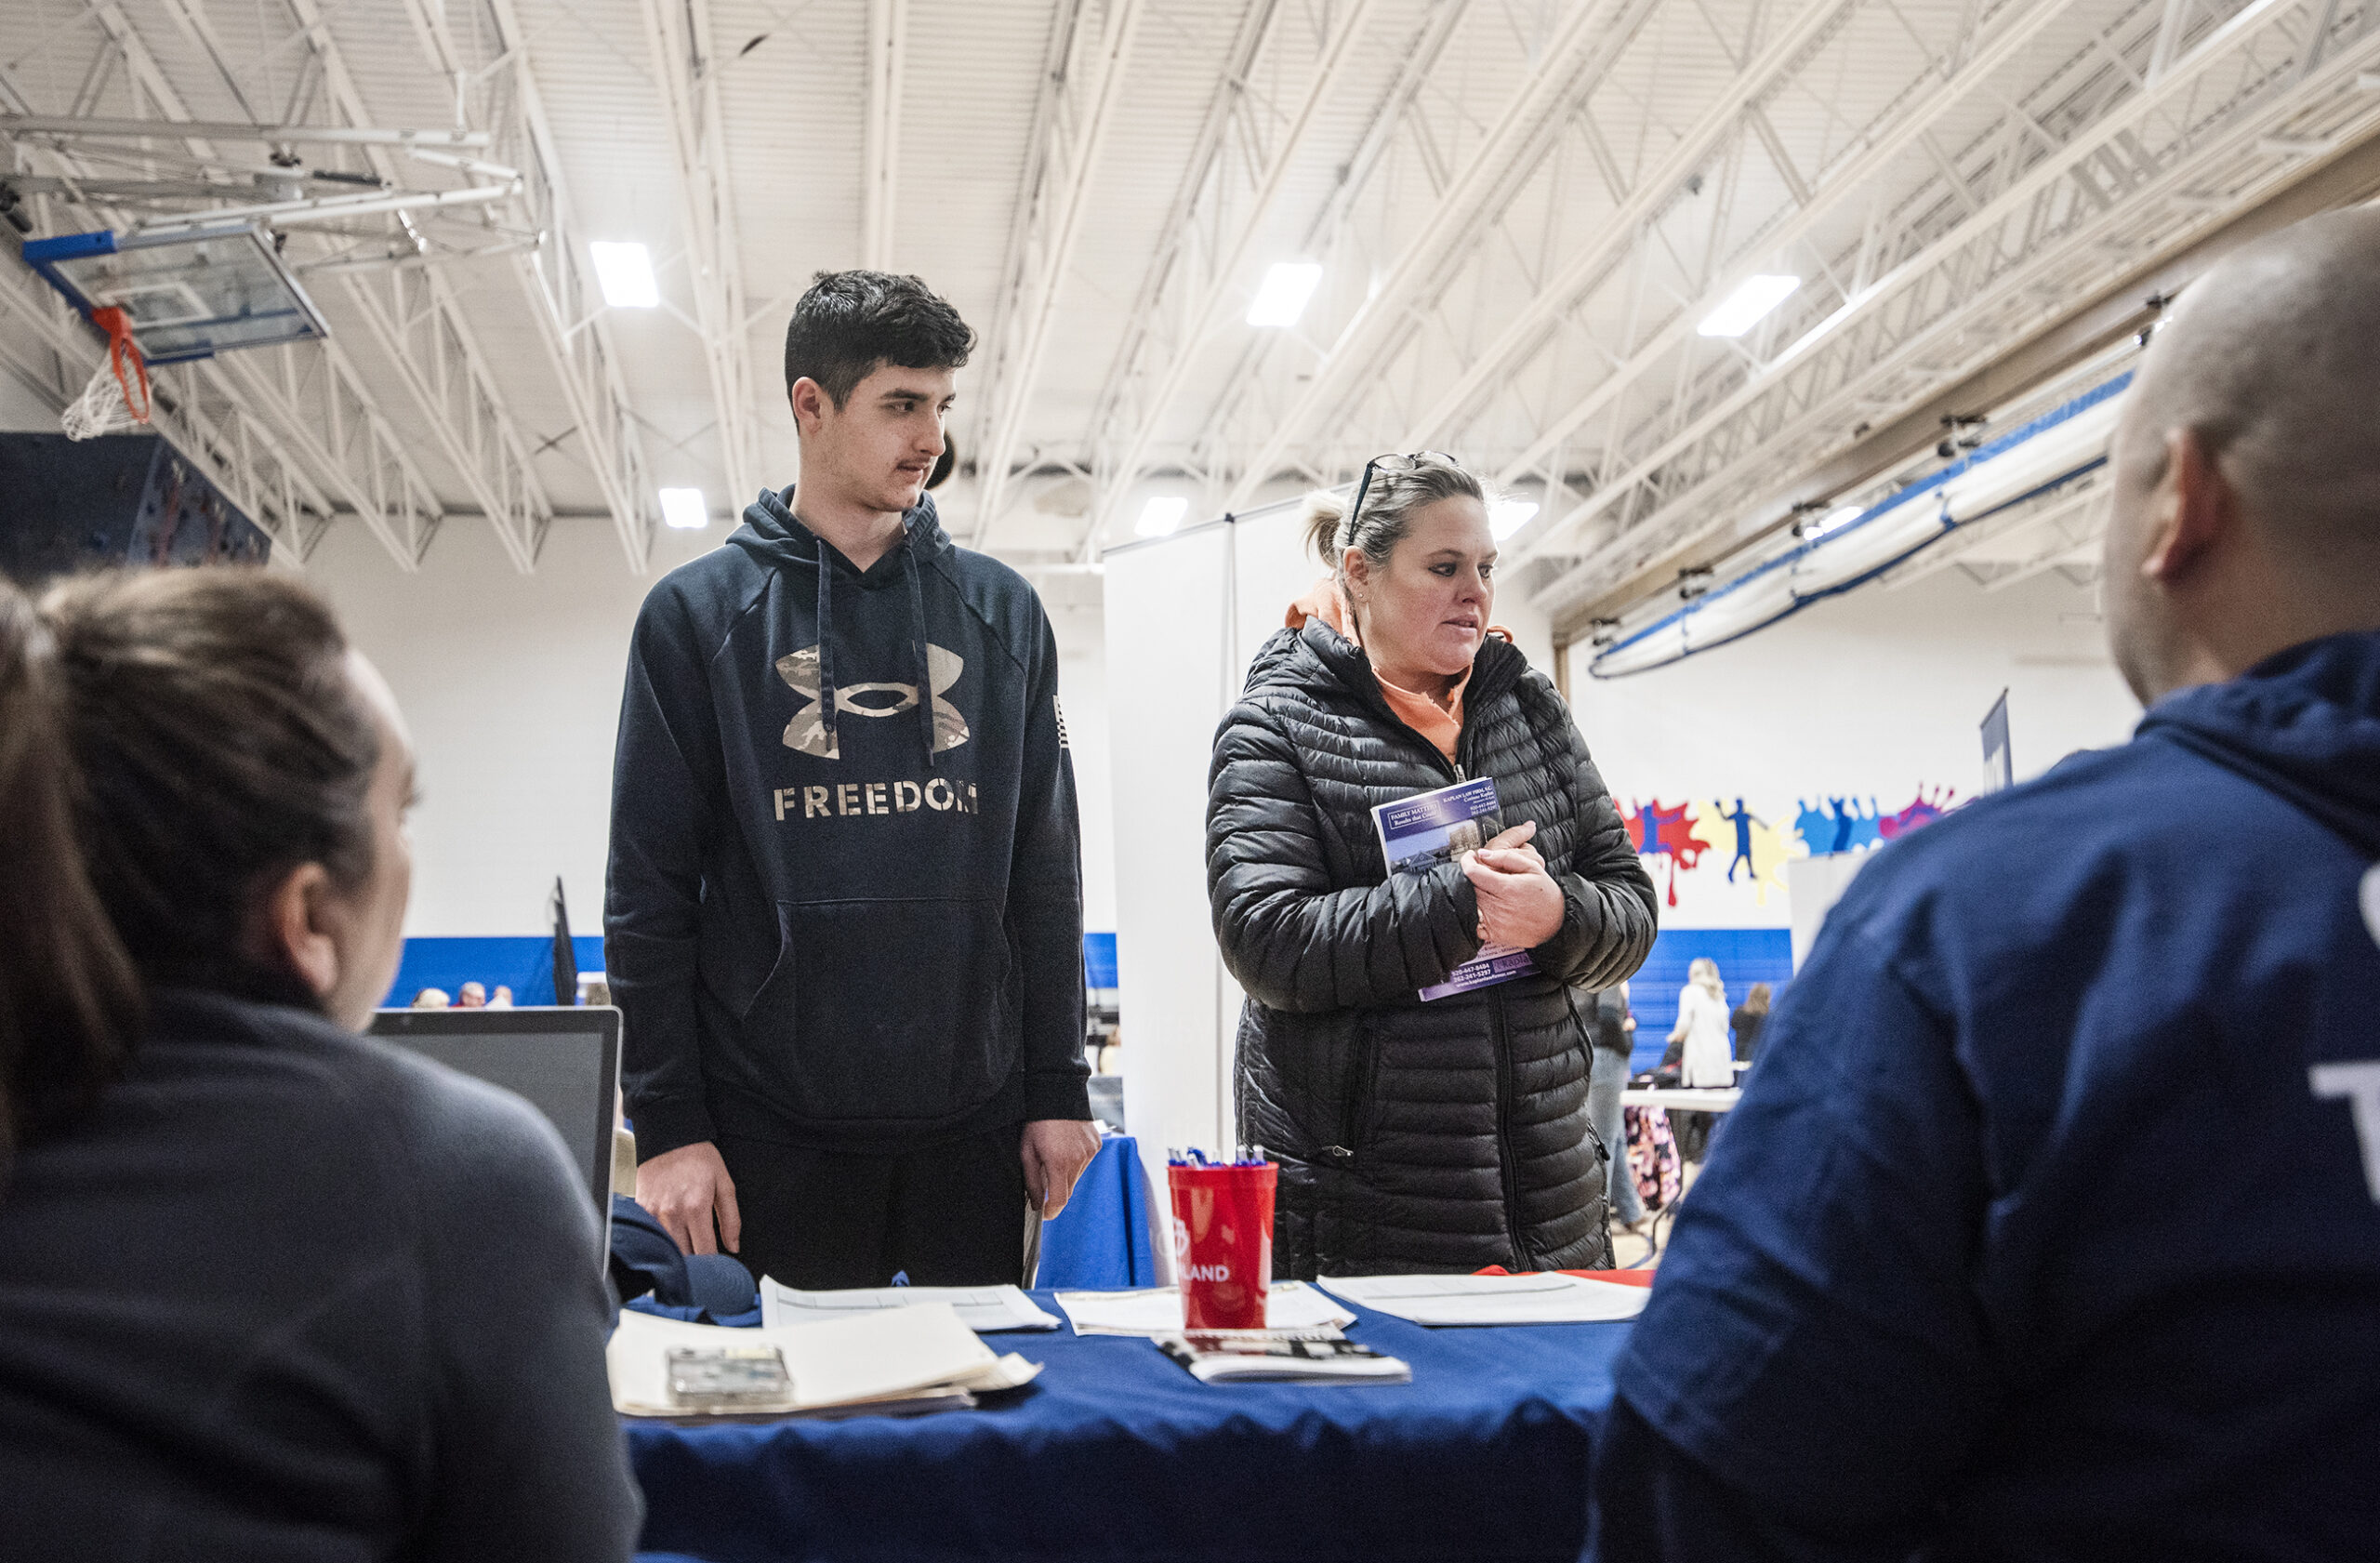 A student and his mother stop by a booth to talk to people at a career fair.